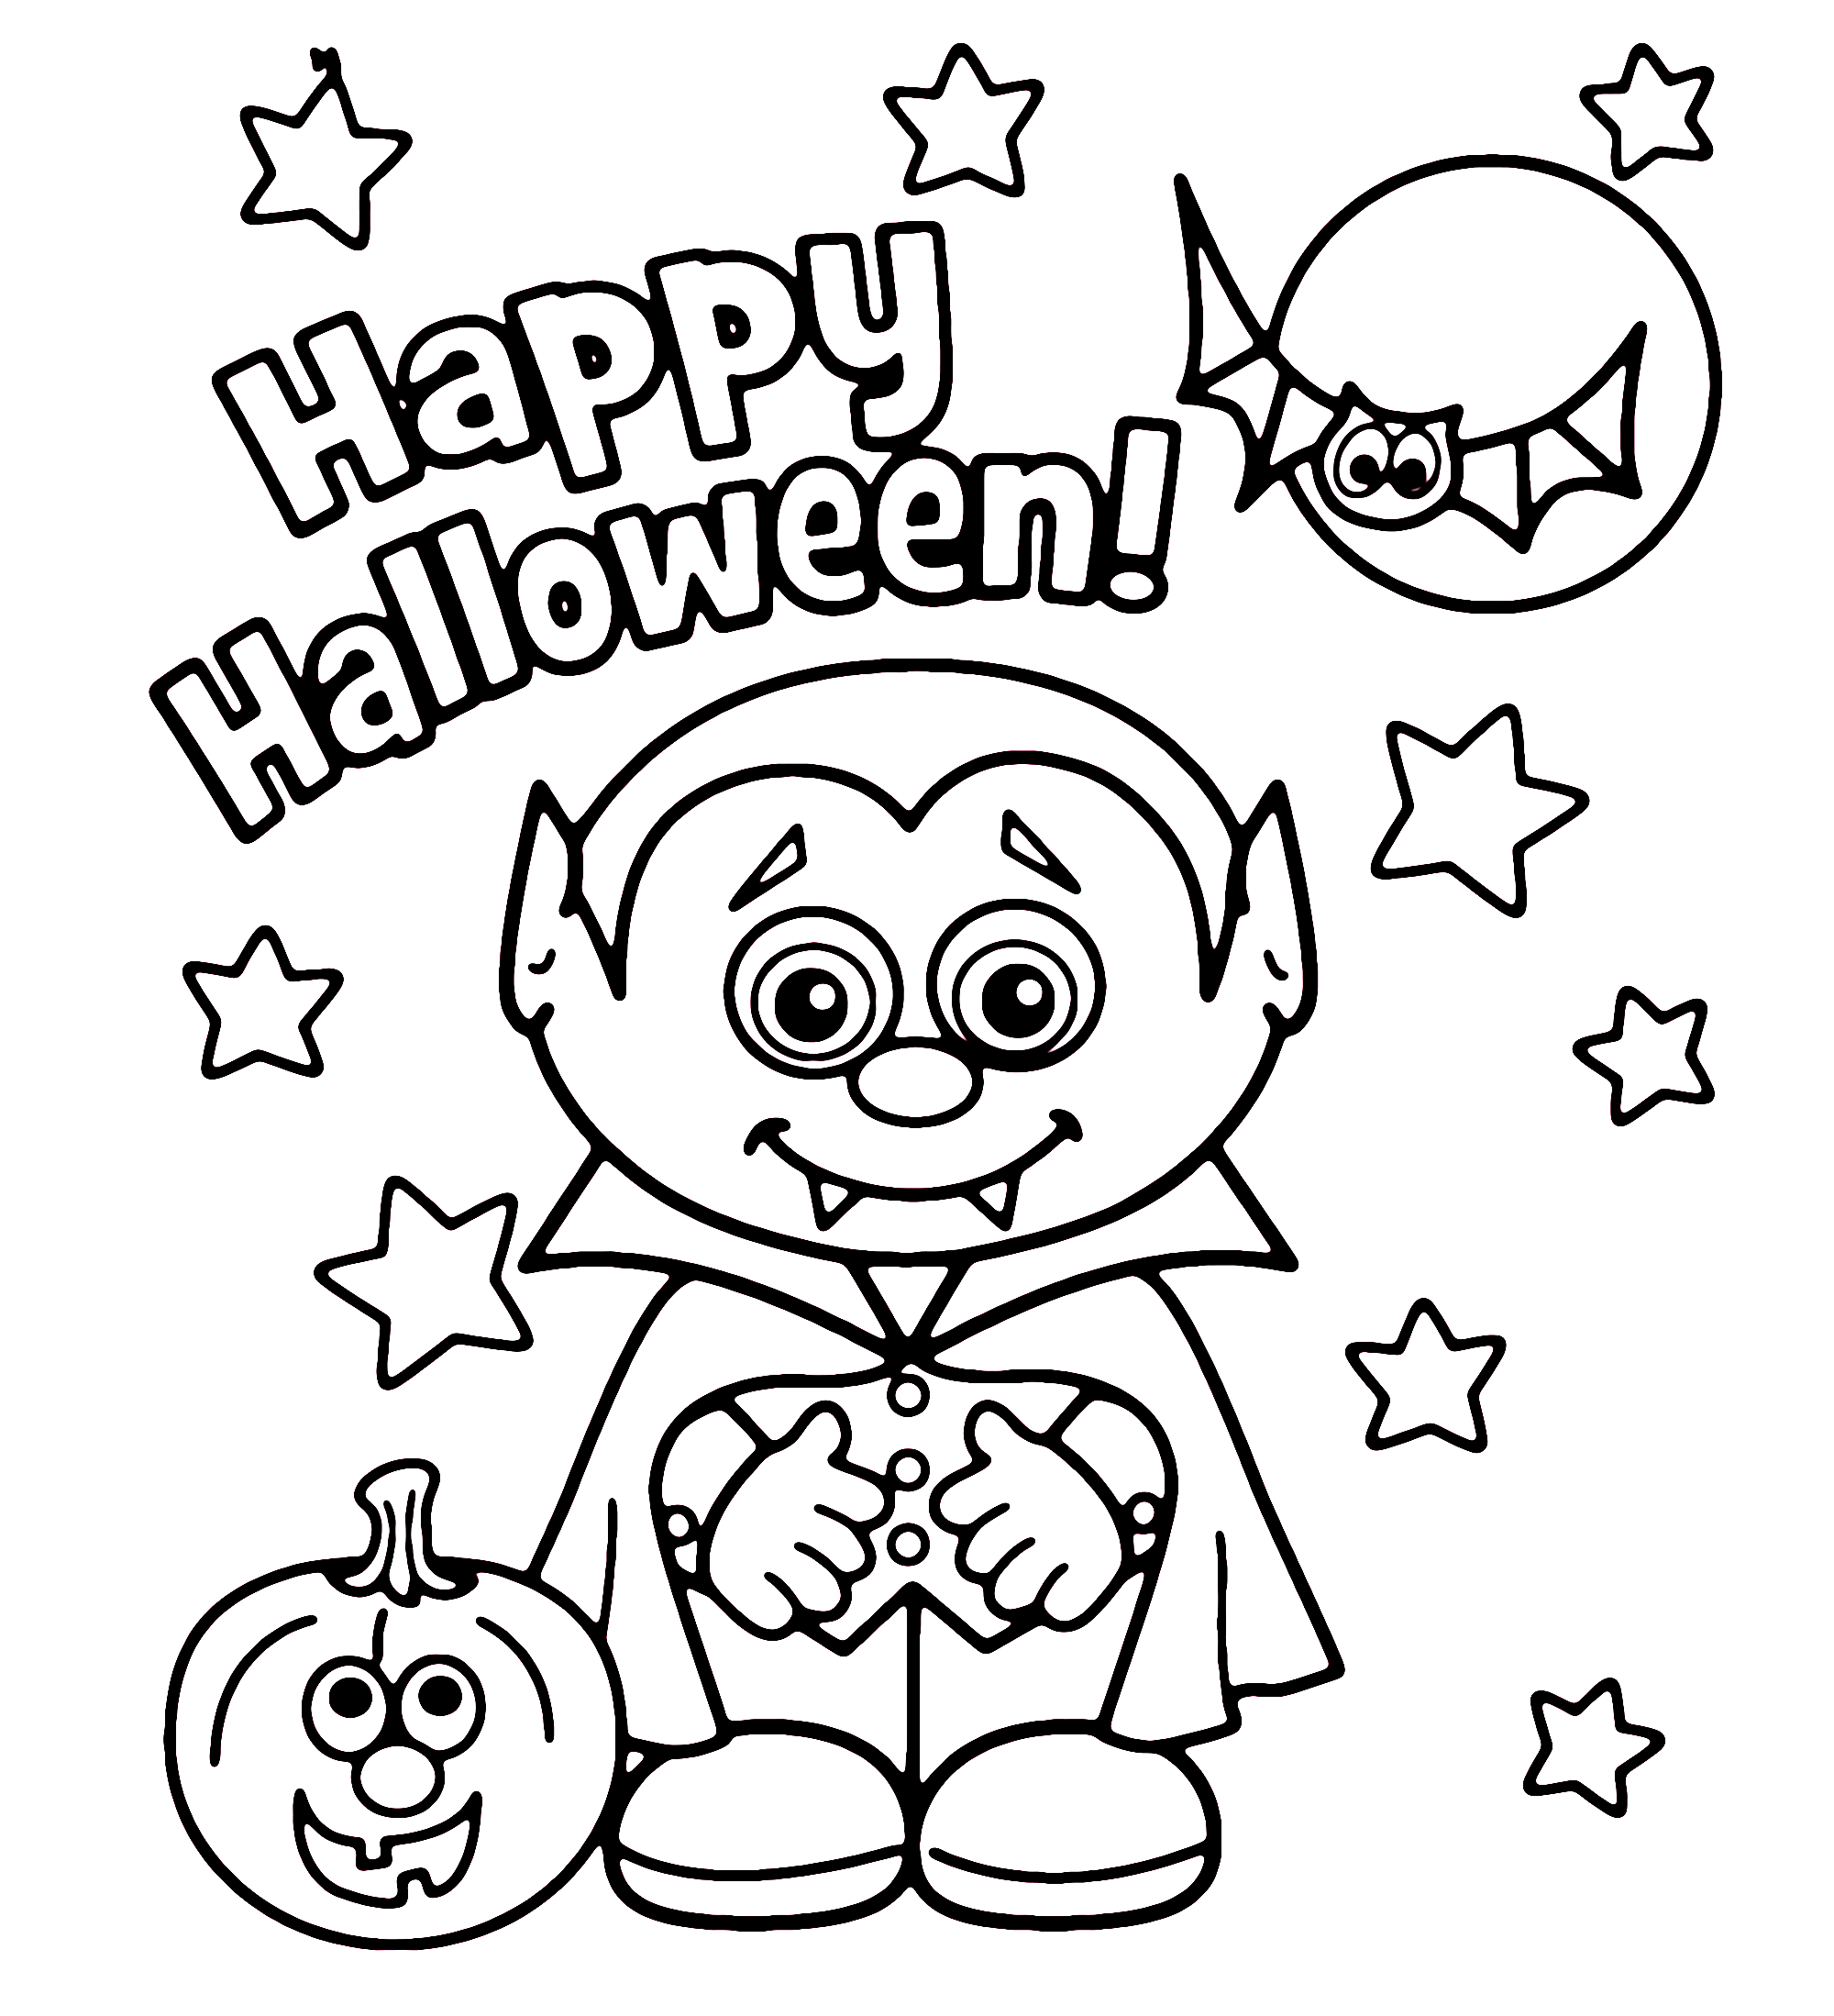 Coloring Page for Happy Halloween Cute Vampire with Bats and Pumpkin